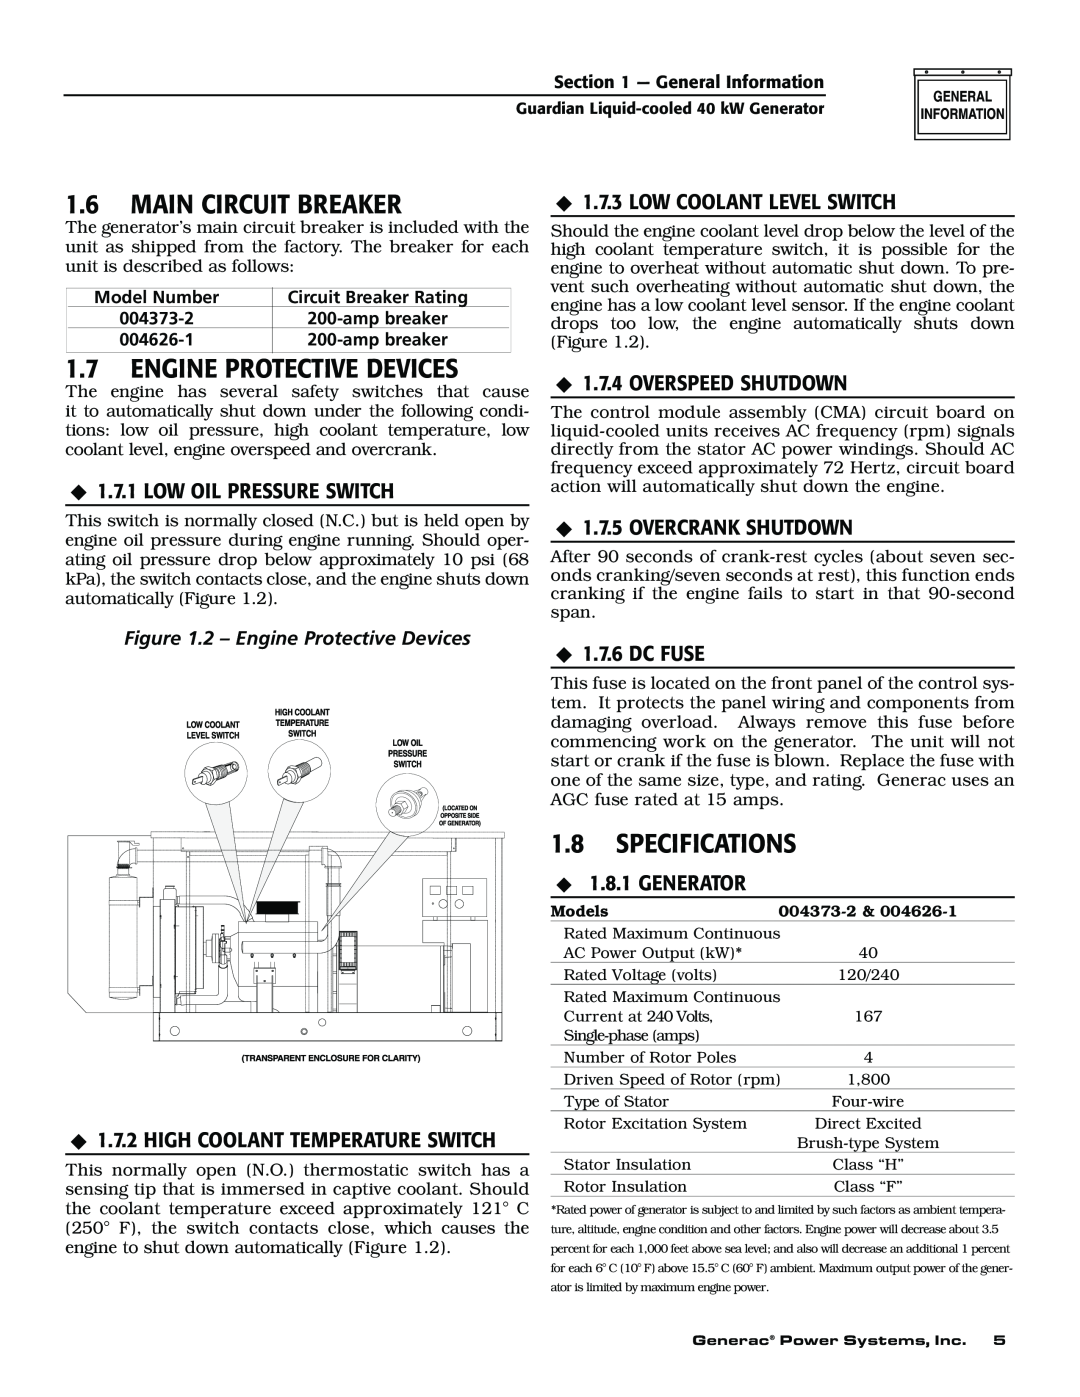 Generac 004626-1, 004373-2 Main Circuit Breaker, Engine Protective Devices, Specifications, Low Coolant Level Switch 